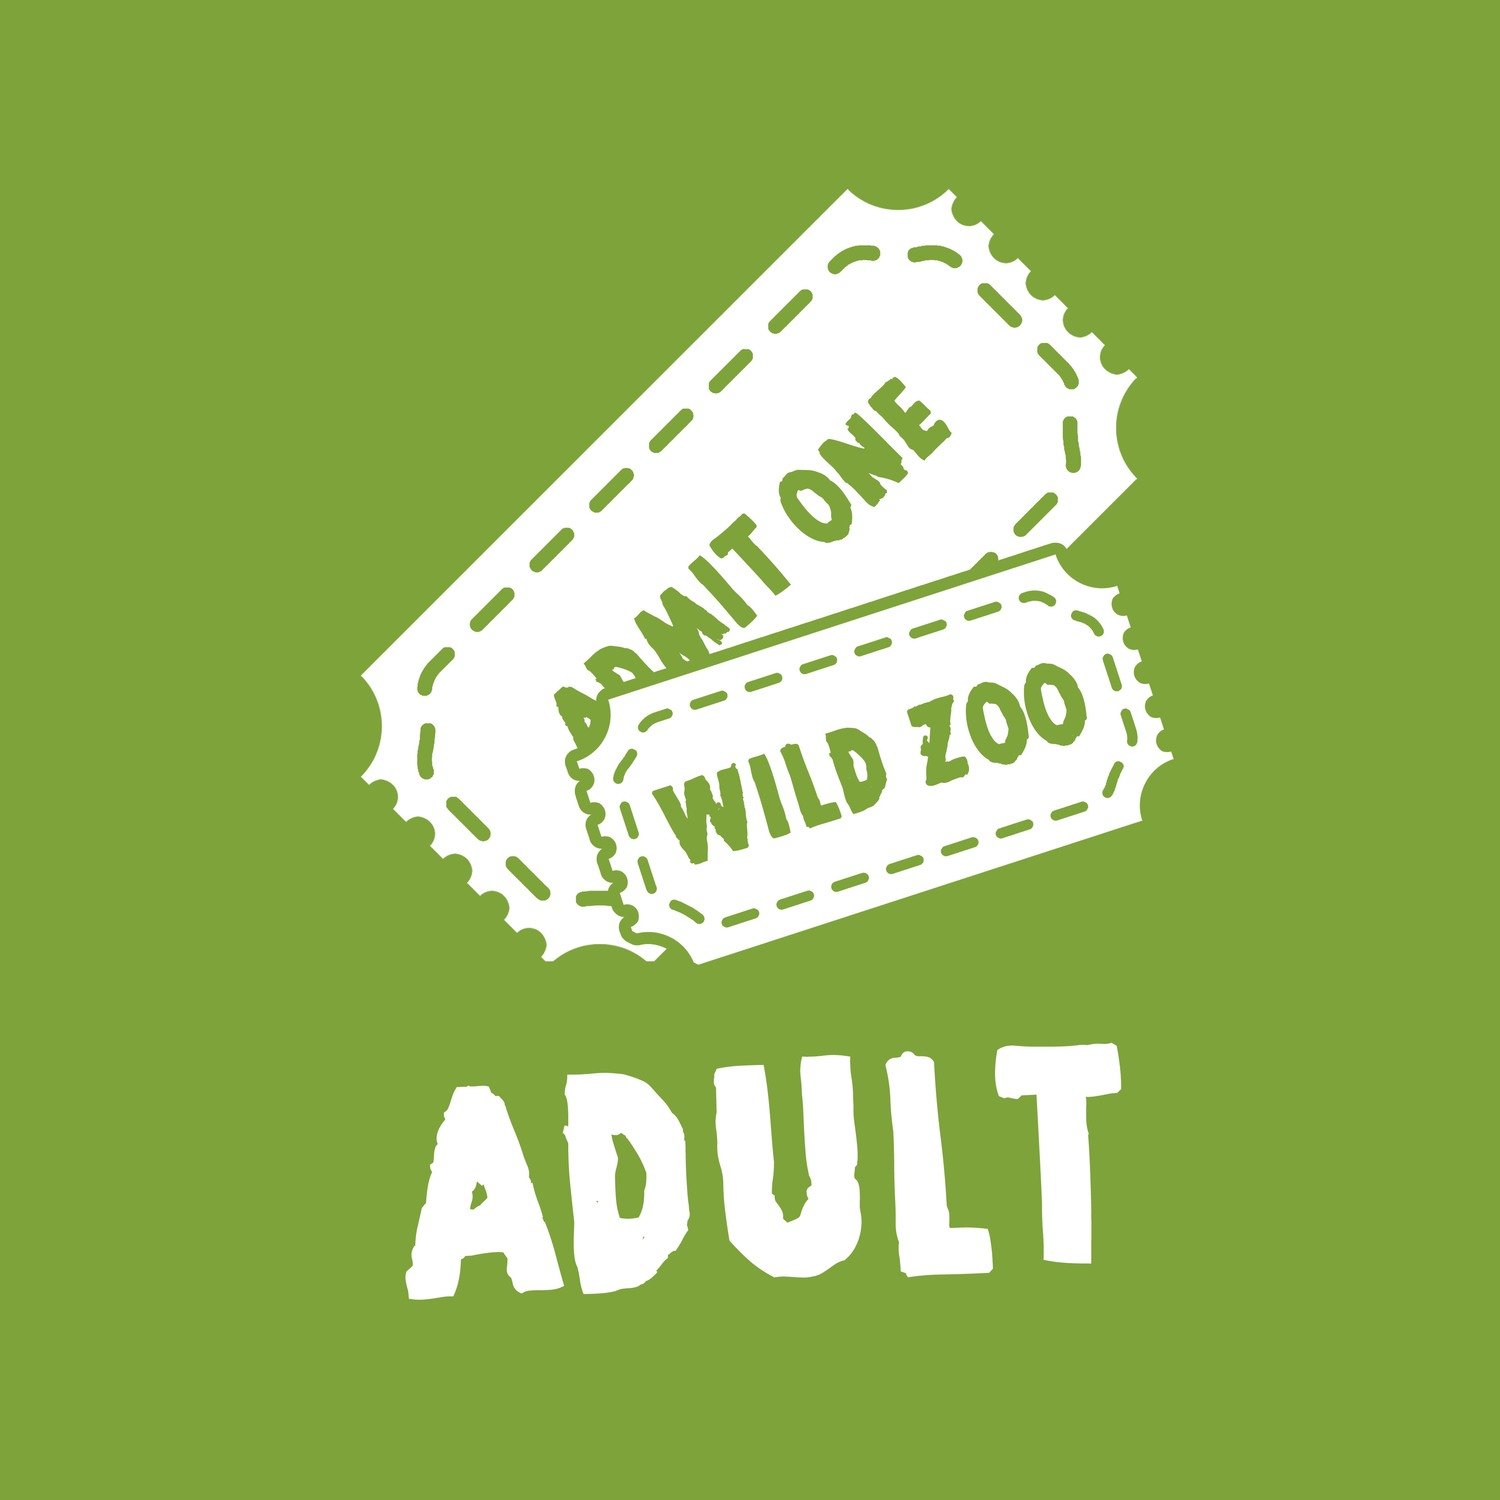 Wild Zoological Park X1 Adult Ticket ( Single Day Use )